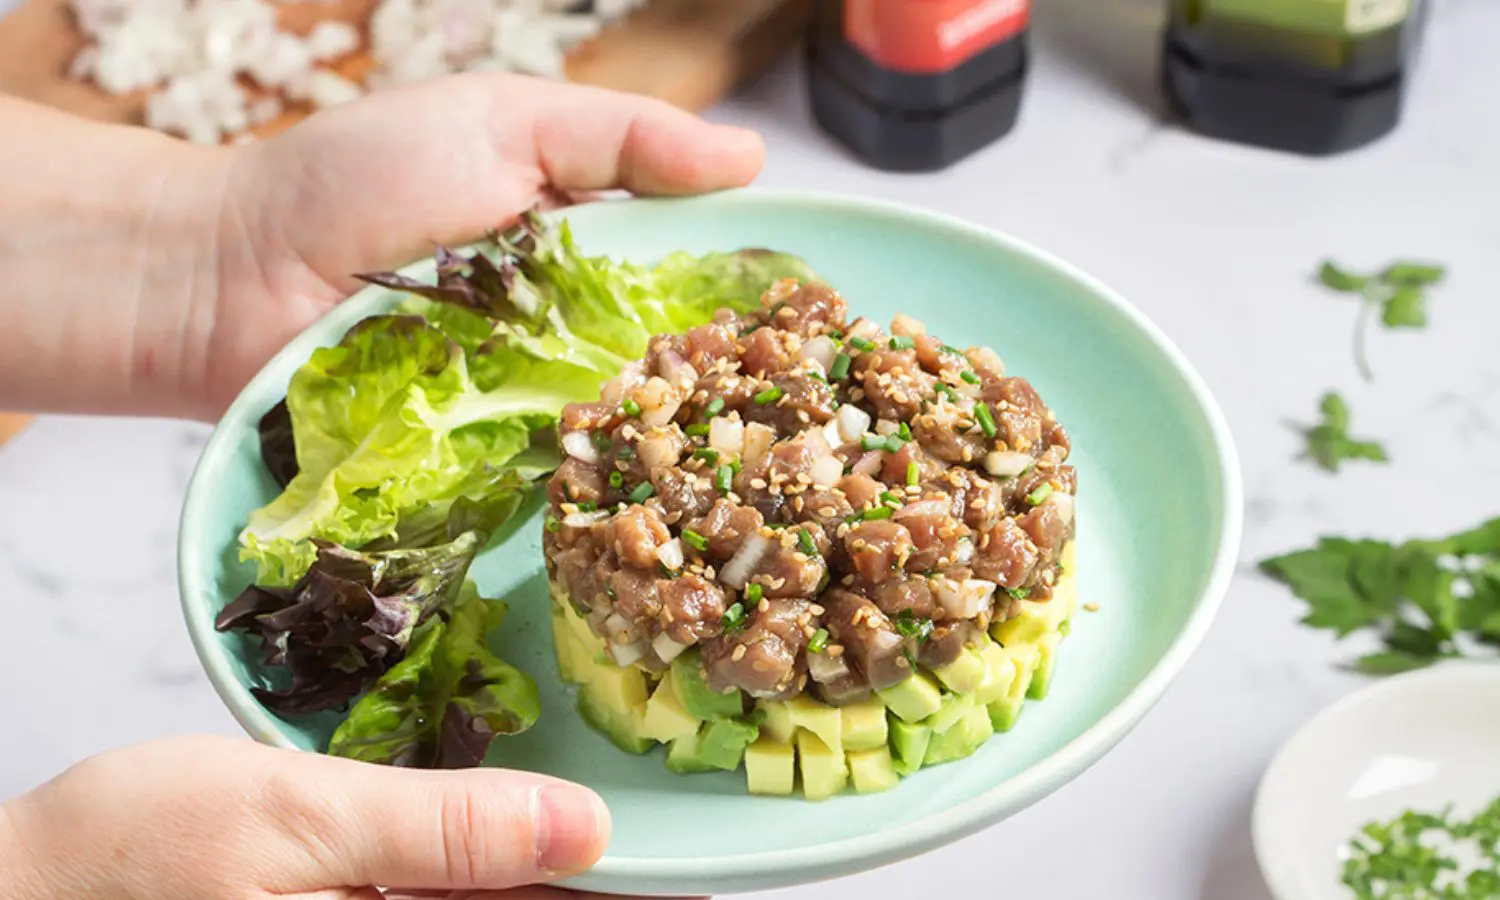 A tuna tartar and avocado recipe served with lettuce and sesame seeds